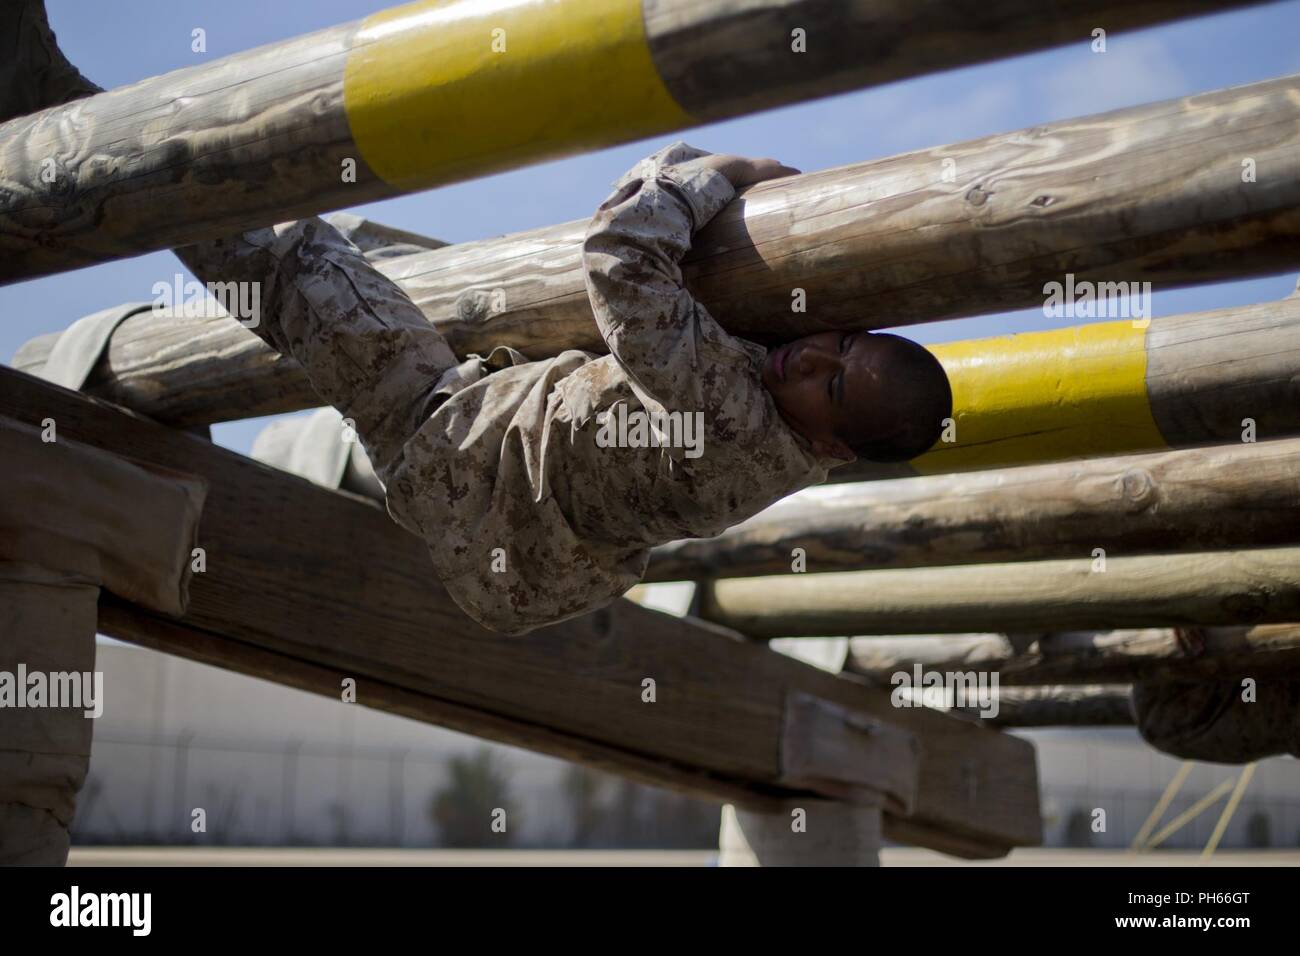 A recruit with Bravo Company, 1st Recruit Training Battalion, scale an obstacle during a confidence course event at Marine Corps Recruit Depot San Diego, June 25. During the confidence course, recruits were required to achieve each obstacle within a limited time. Many of the obstacles test the recruits’ confidence and mental strength in overcoming the challenges before them. Annually, more than 17,000 males recruited from the Western Recruiting Region are trained at MCRD San Diego. Bravo Company is scheduled to graduate Aug. 31. Stock Photo